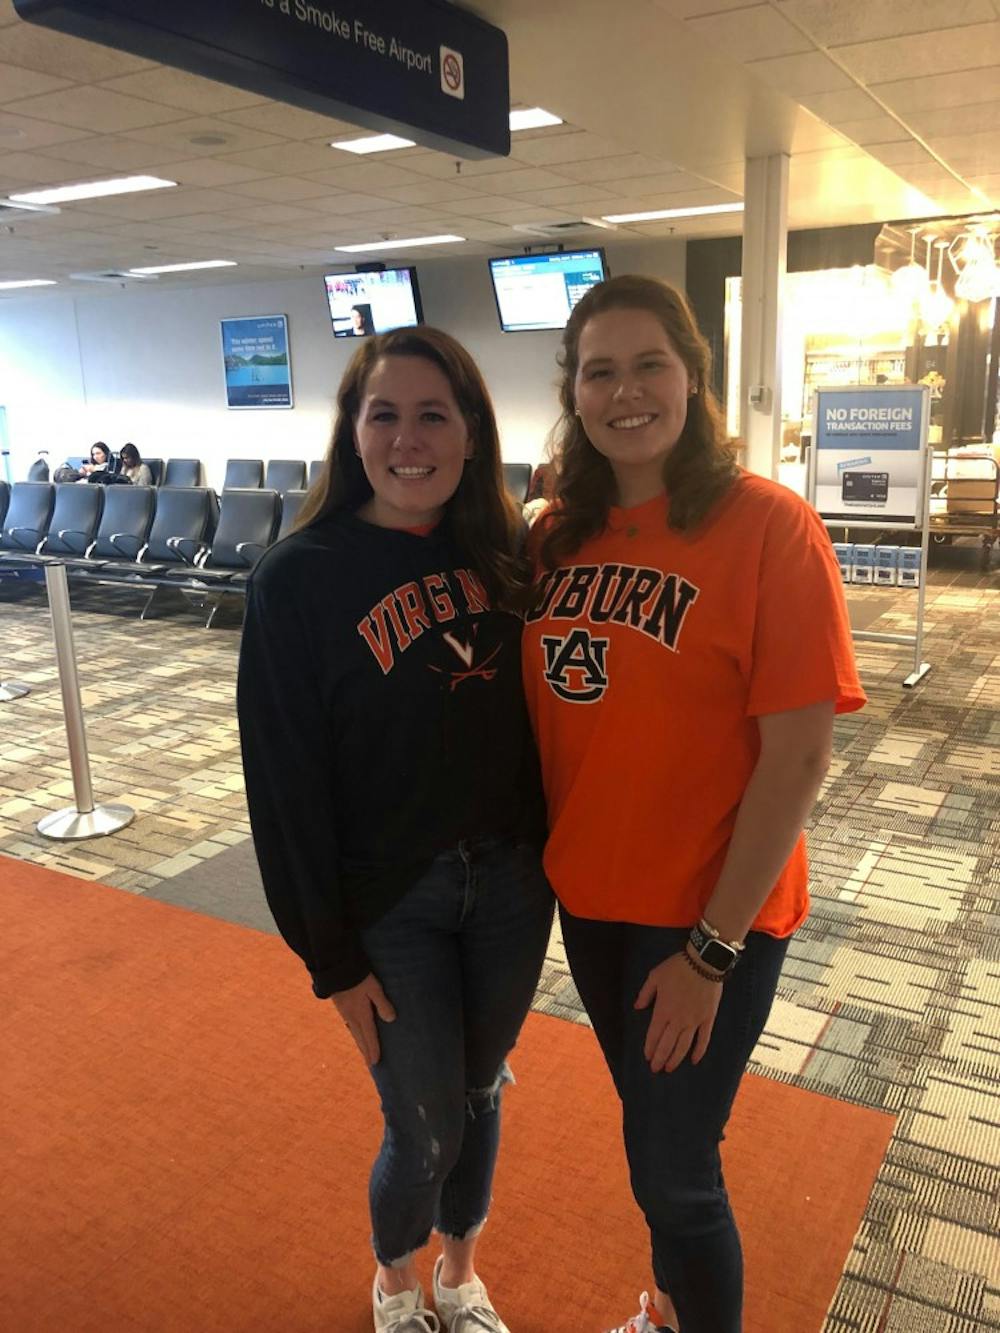 Kate and Courtney Anne Nappi dressed in their respective school attire as they arrive in Minneapolis to attend the Final Four matchup between Auburn and Virginia on Saturday, April 6, 2019. 